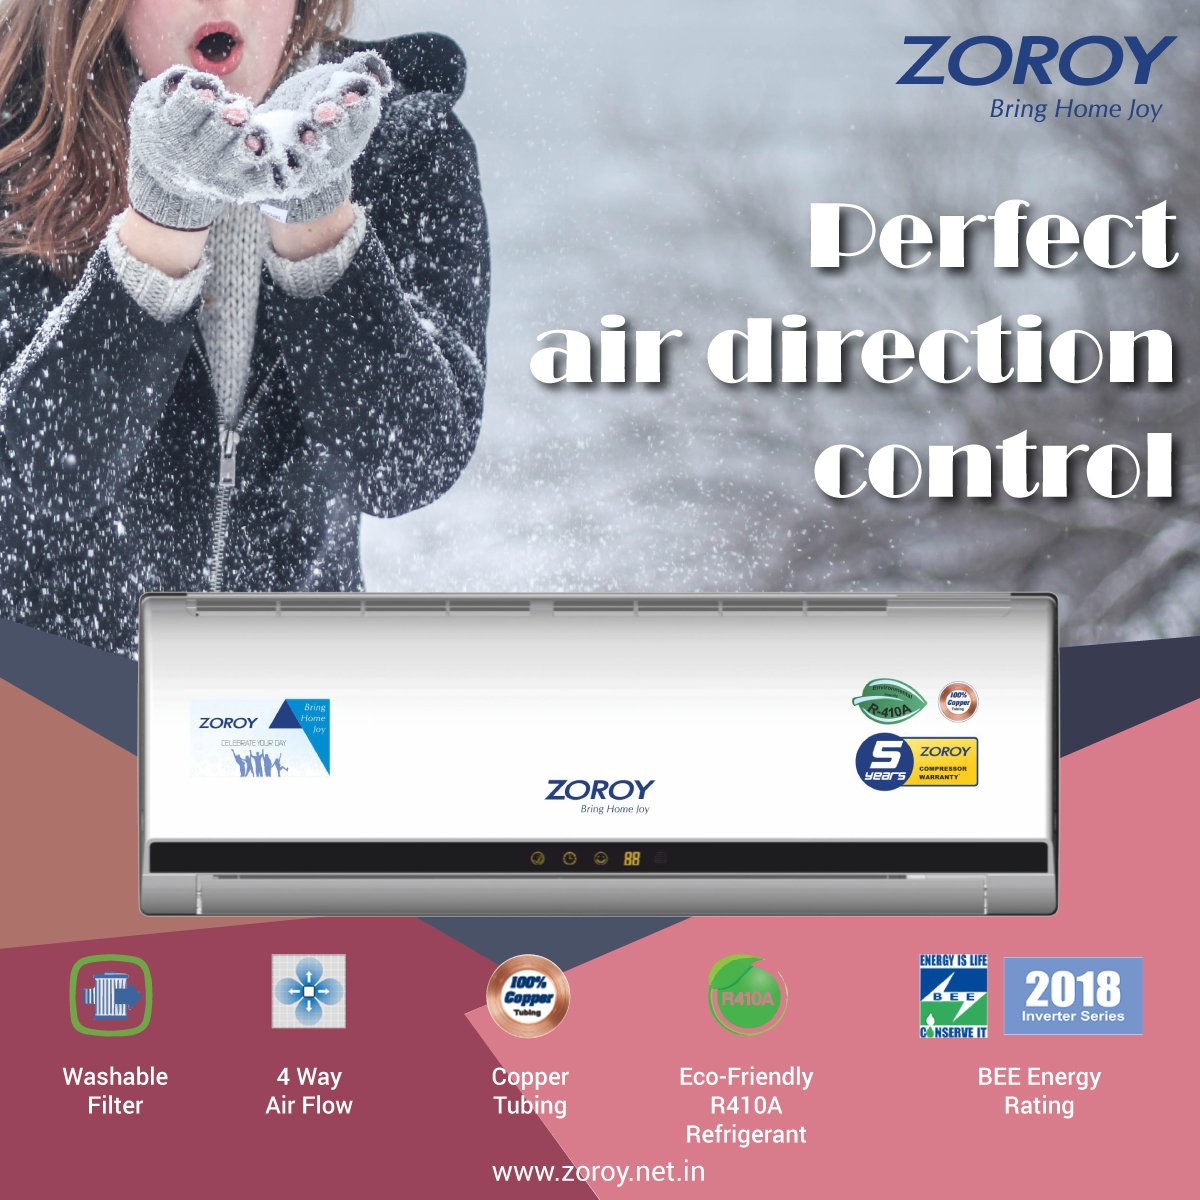 The right kind of Air Conditioner can turn your home & office into an oasis of comfort; whenever you use it! So, make the right choice, CHOOSE the BEST- Zoroy AC! To buy contact us @ 1800 103 3634 | Website: zoroy.net.in #perfectcontrol #airflow #saveonbills #gocool